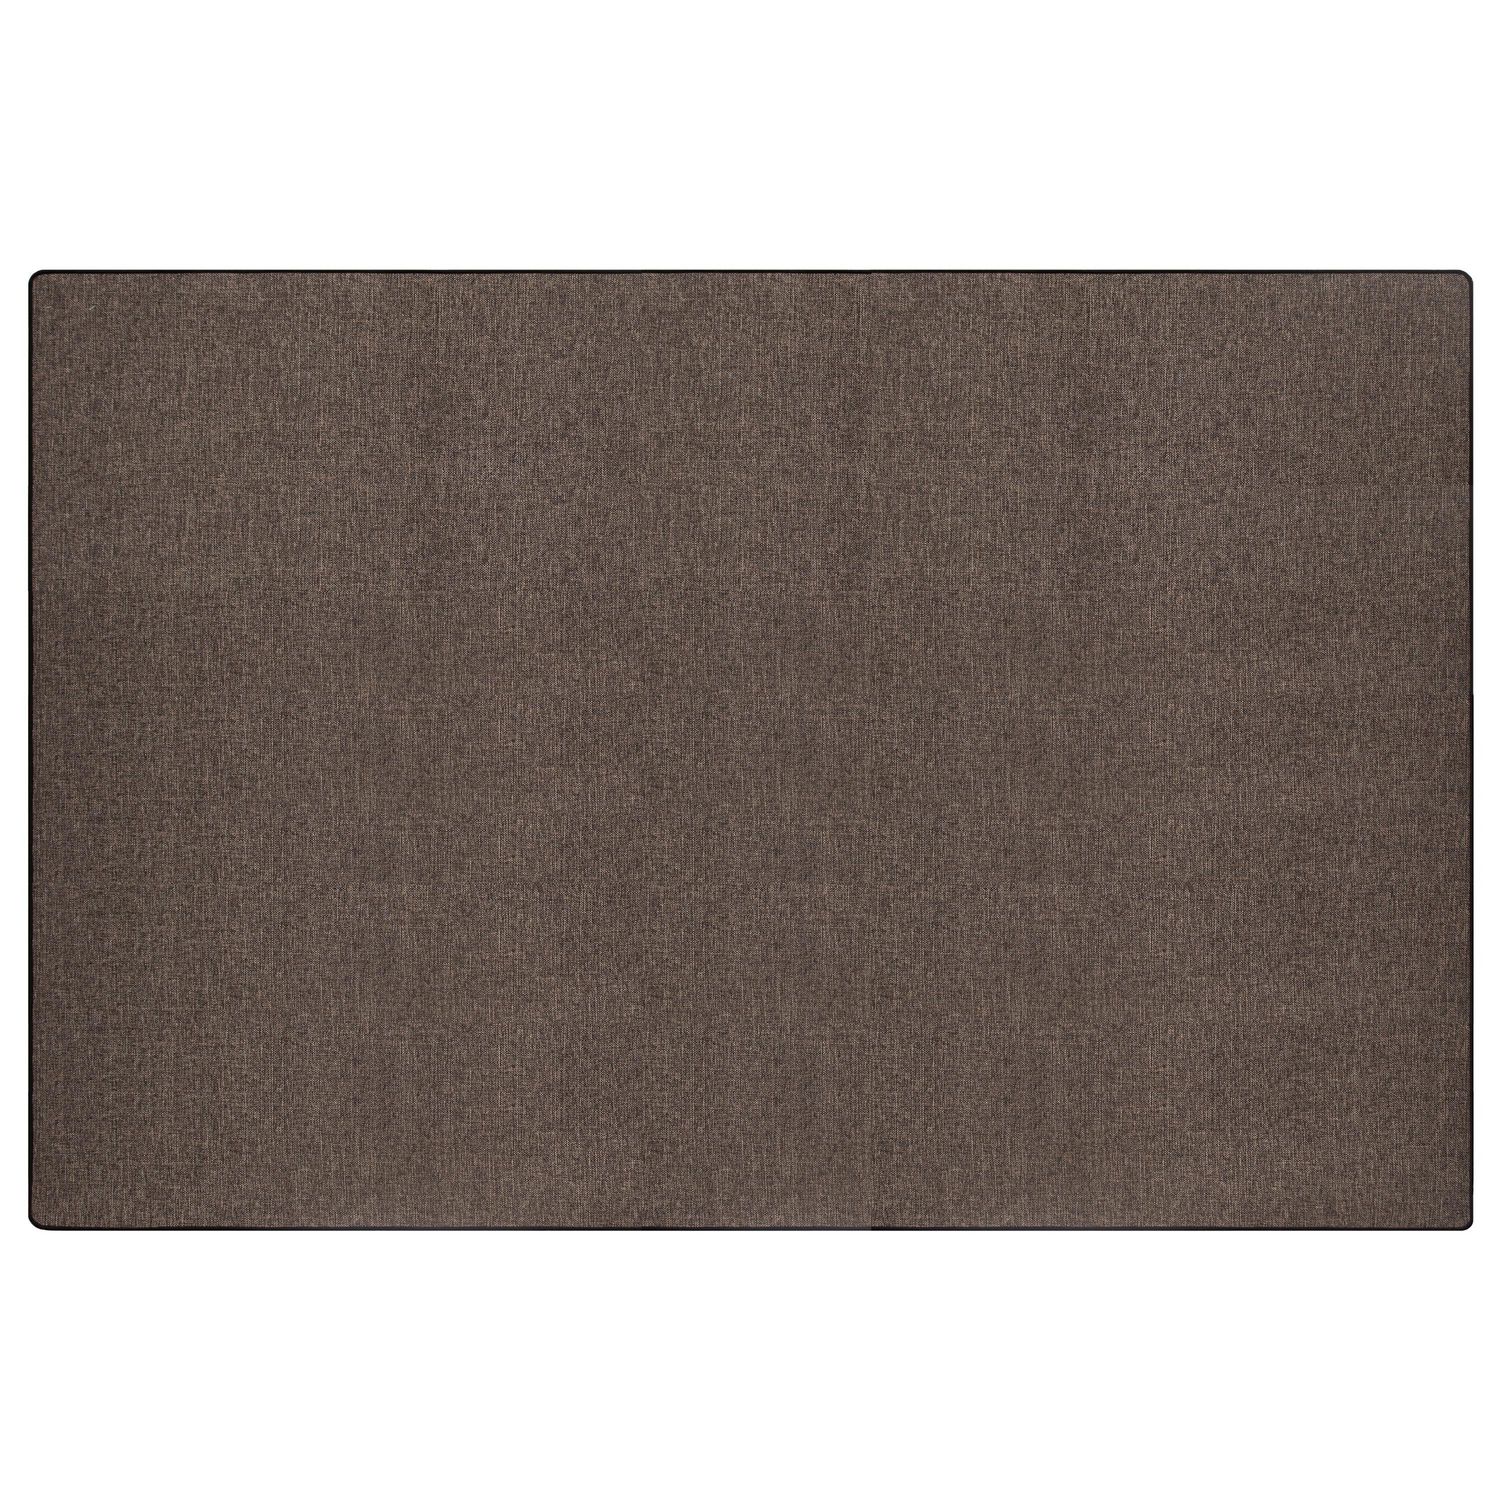 4 ft x 6 ft Wicklow Charcoal Mat, Mainstays 4 ft x 6 ft Wicklow Charcoal Mat  